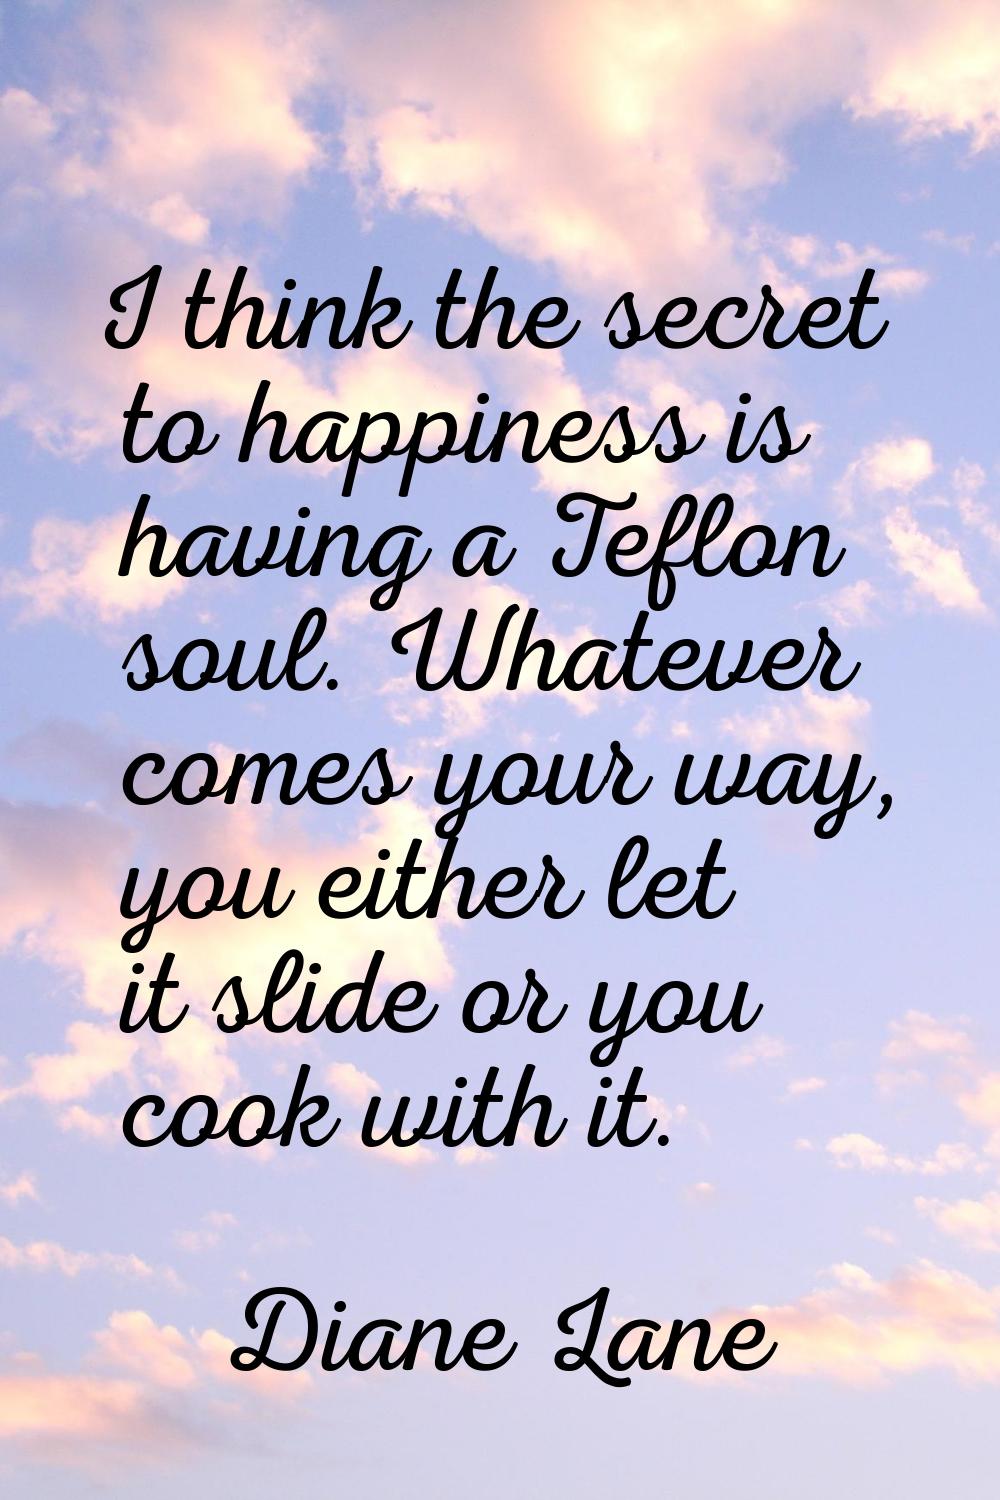 I think the secret to happiness is having a Teflon soul. Whatever comes your way, you either let it